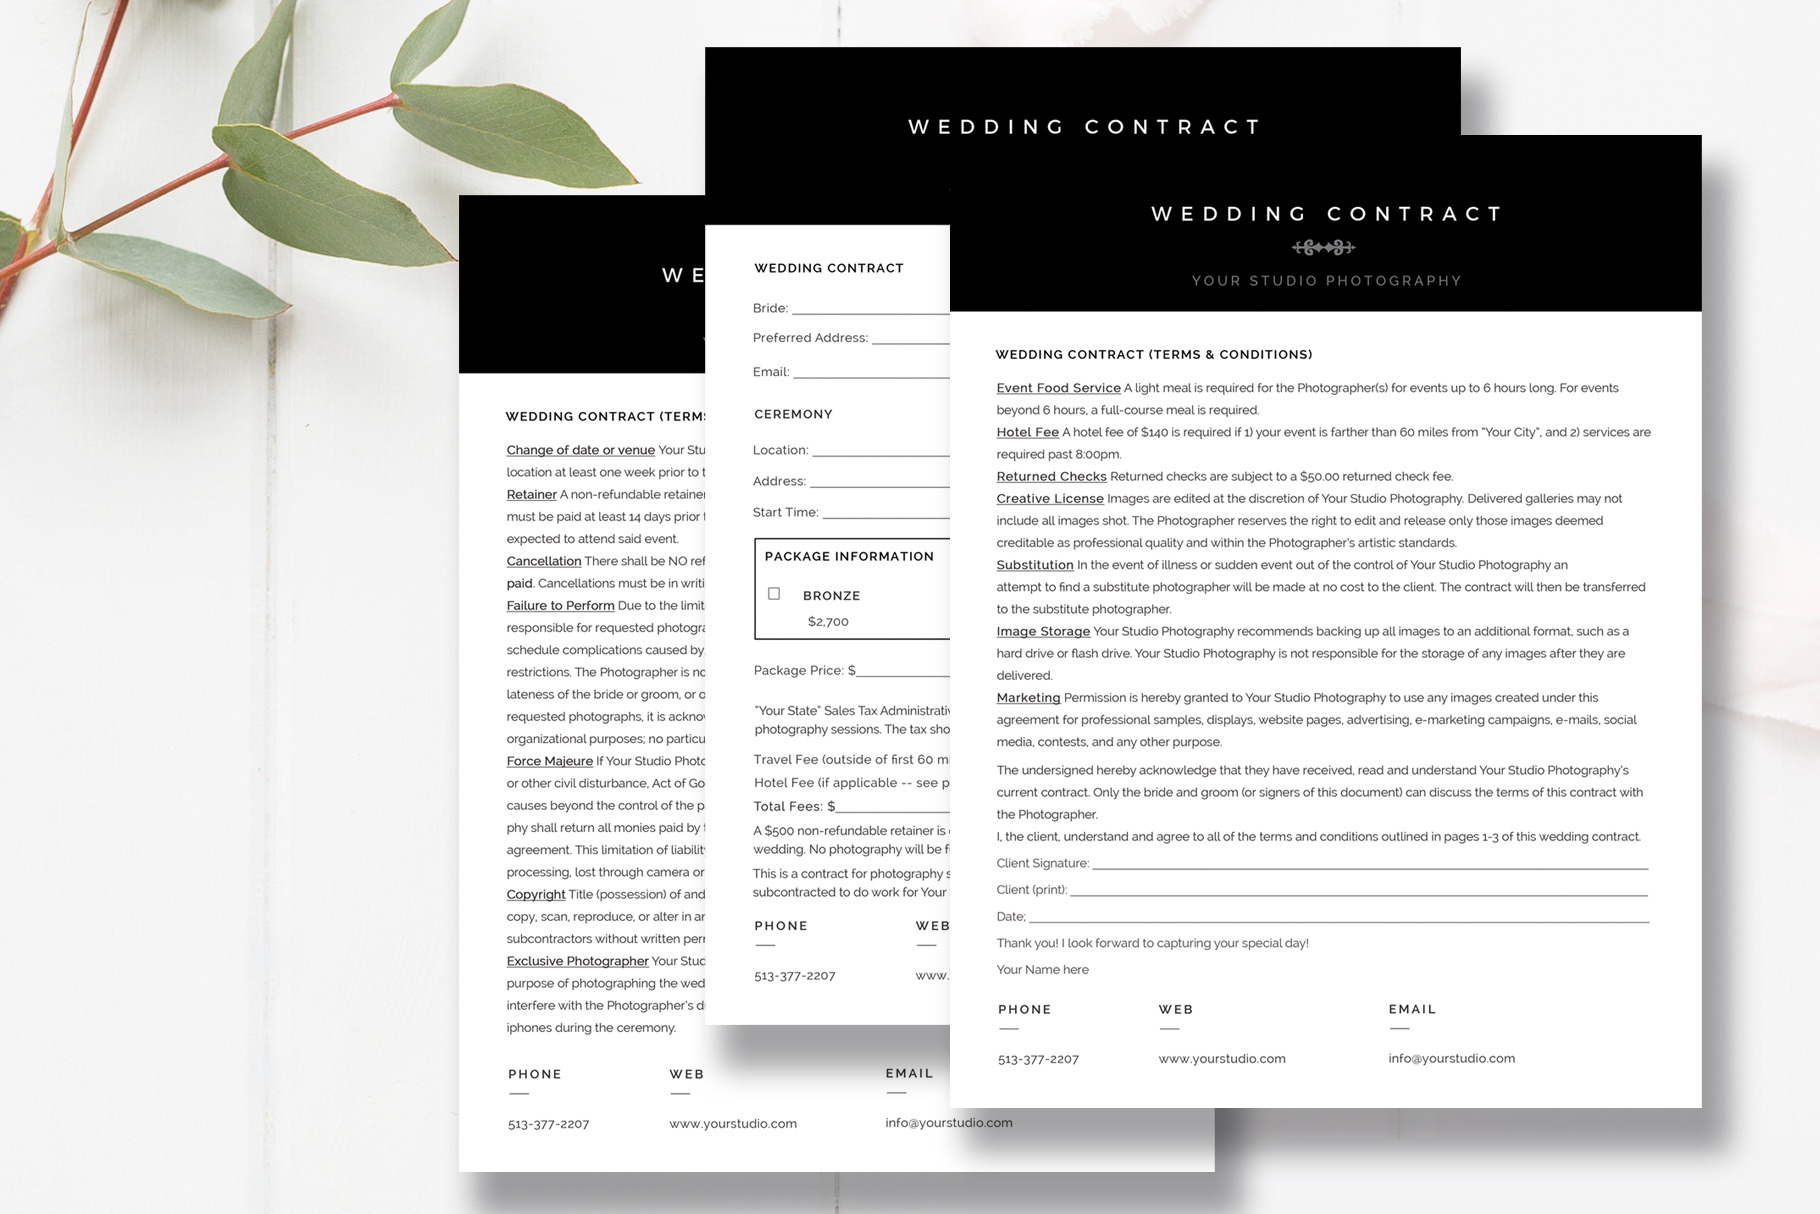 Wedding Photography Contract Template from cmkt-image-prd.freetls.fastly.net